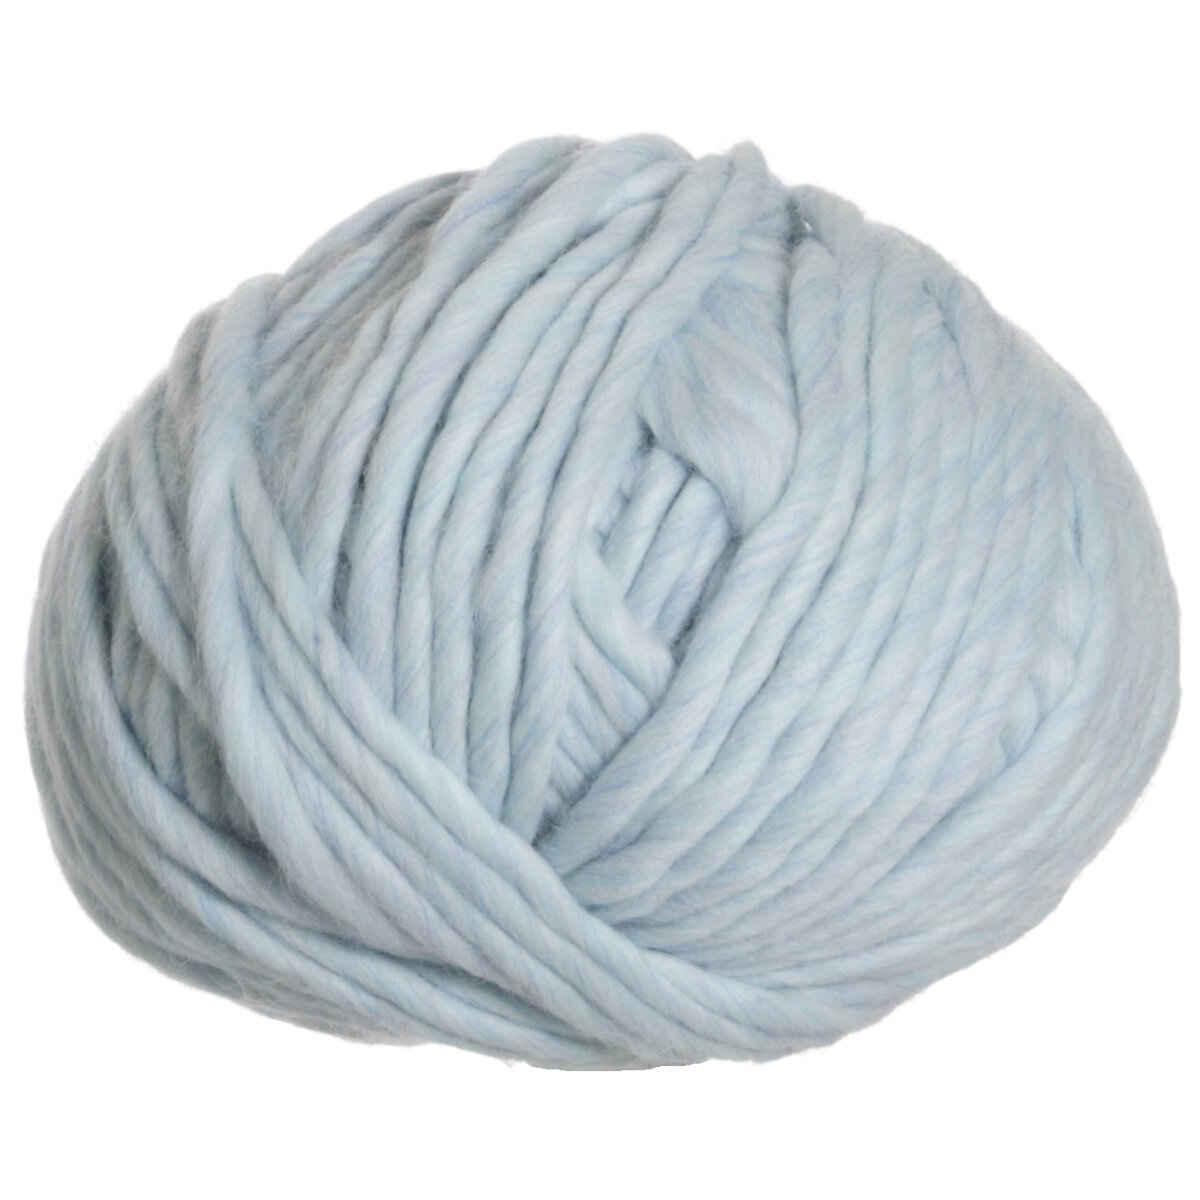 Wool and the Gang Crazy Sexy Wool Yarn - Stonewash Blue at Jimmy Beans Wool